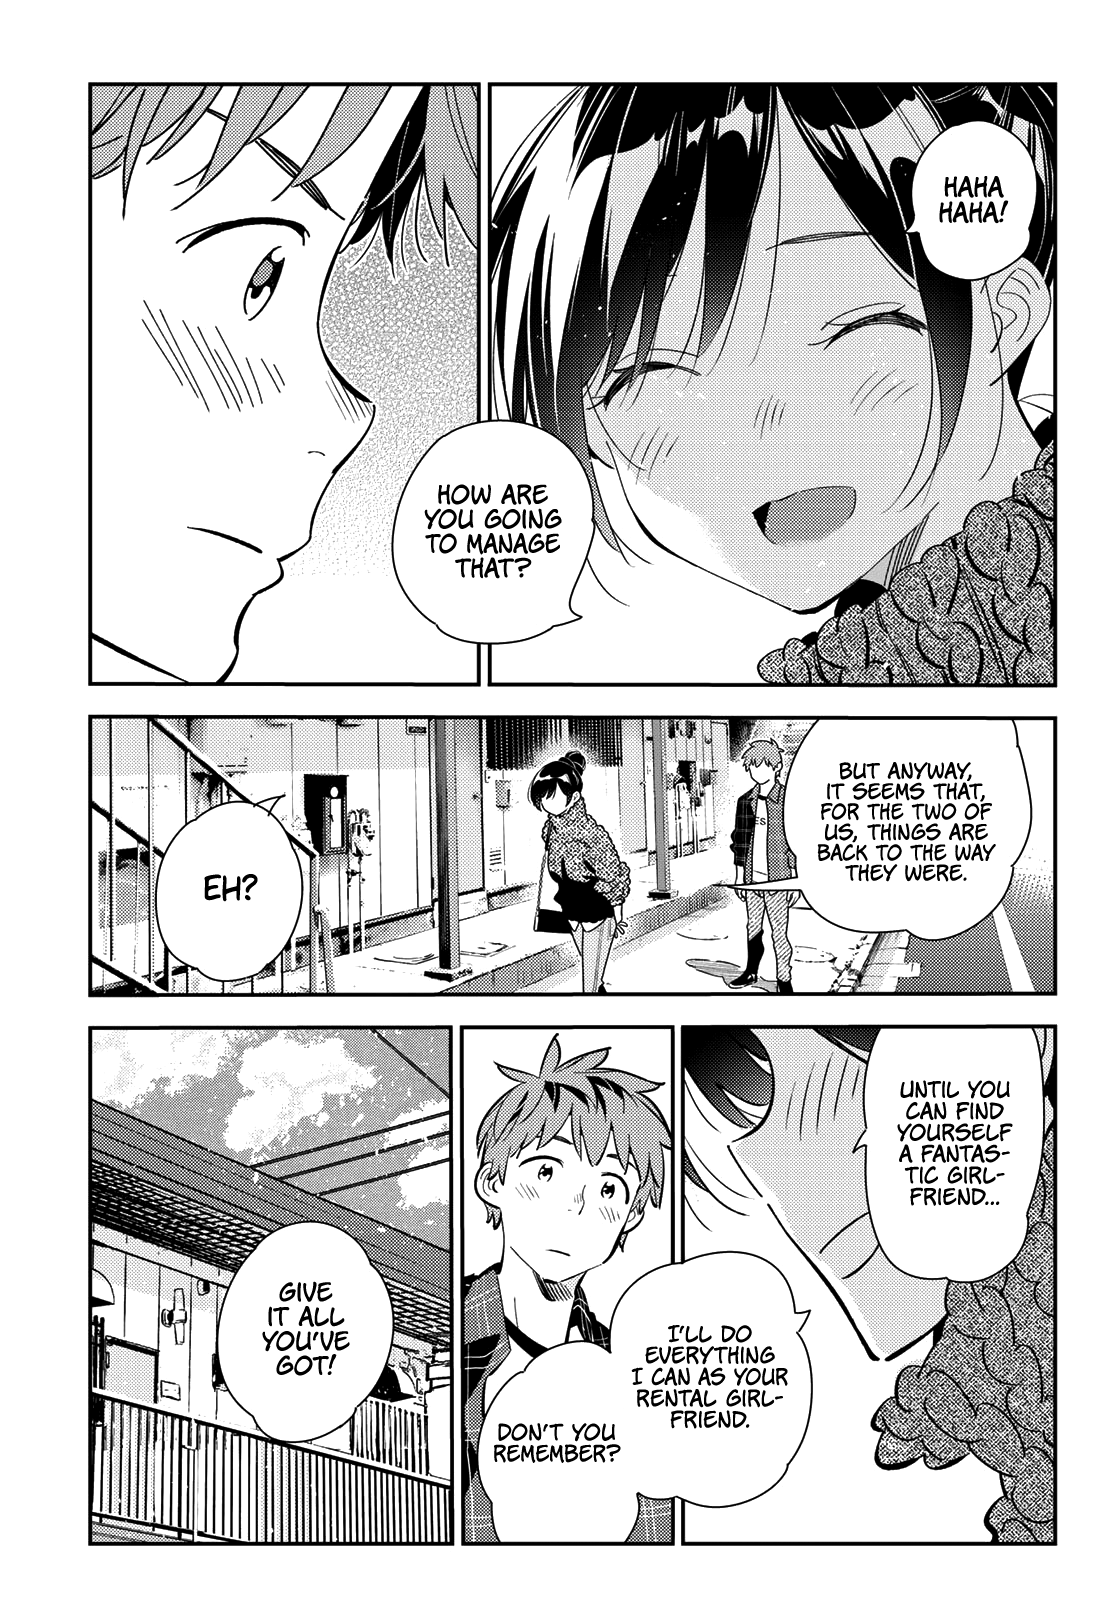 Rent A GirlFriend, Chapter 174 The Girlfriend And The Confession (Part 3) image 010